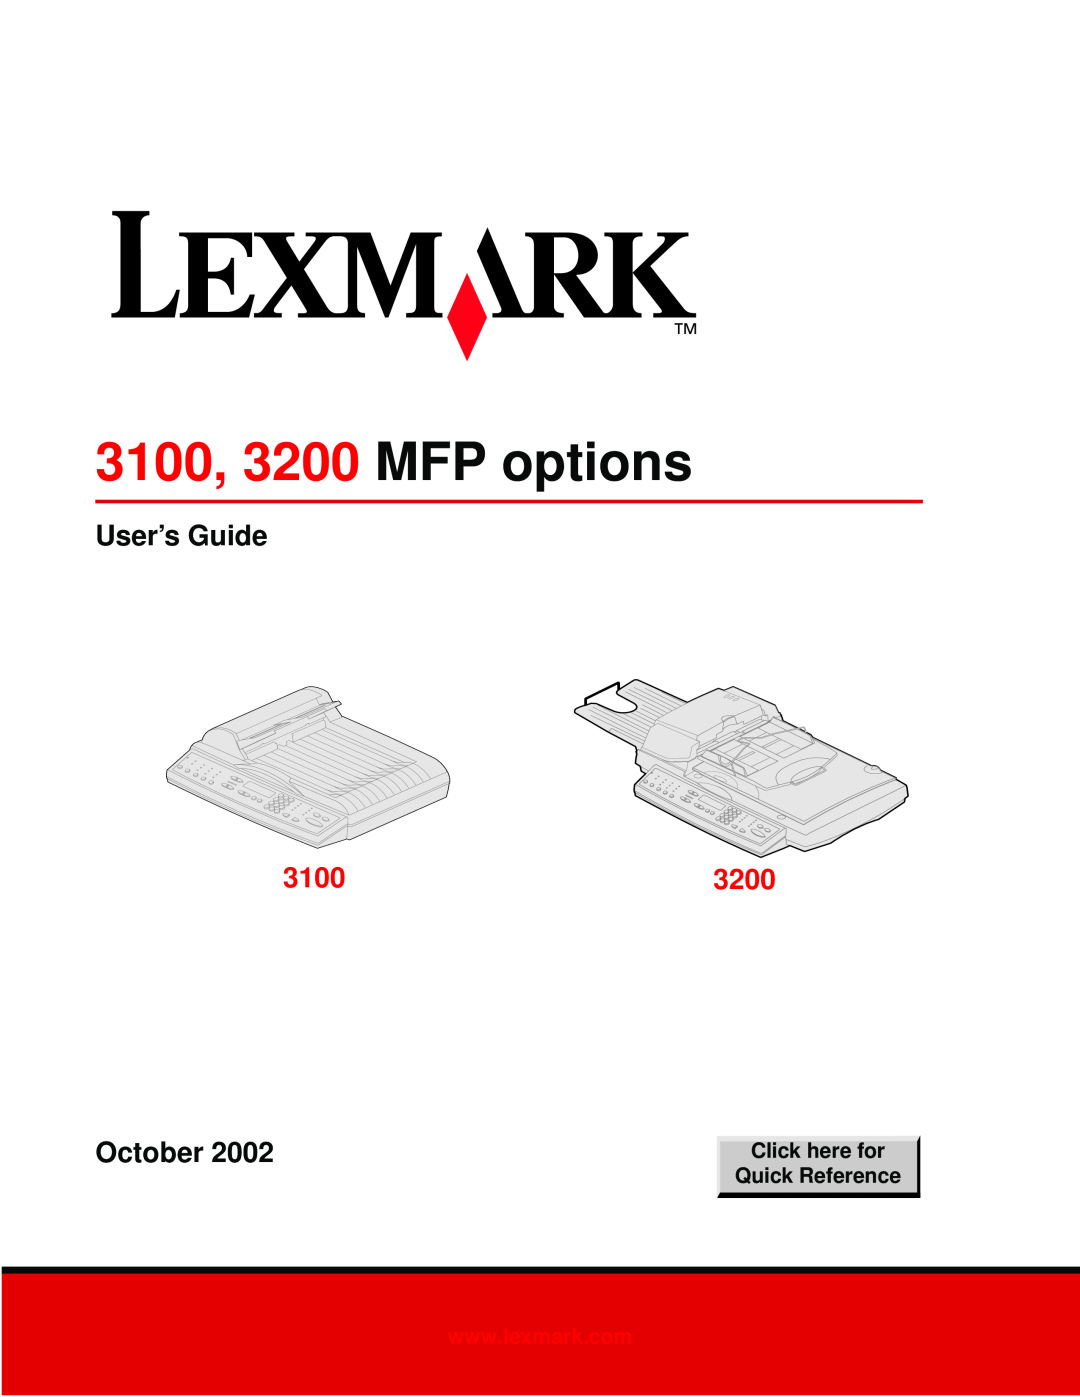 Lexmark manual 3100, 3200 MFP options, User’s Guide, October, Click here for Quick Reference 